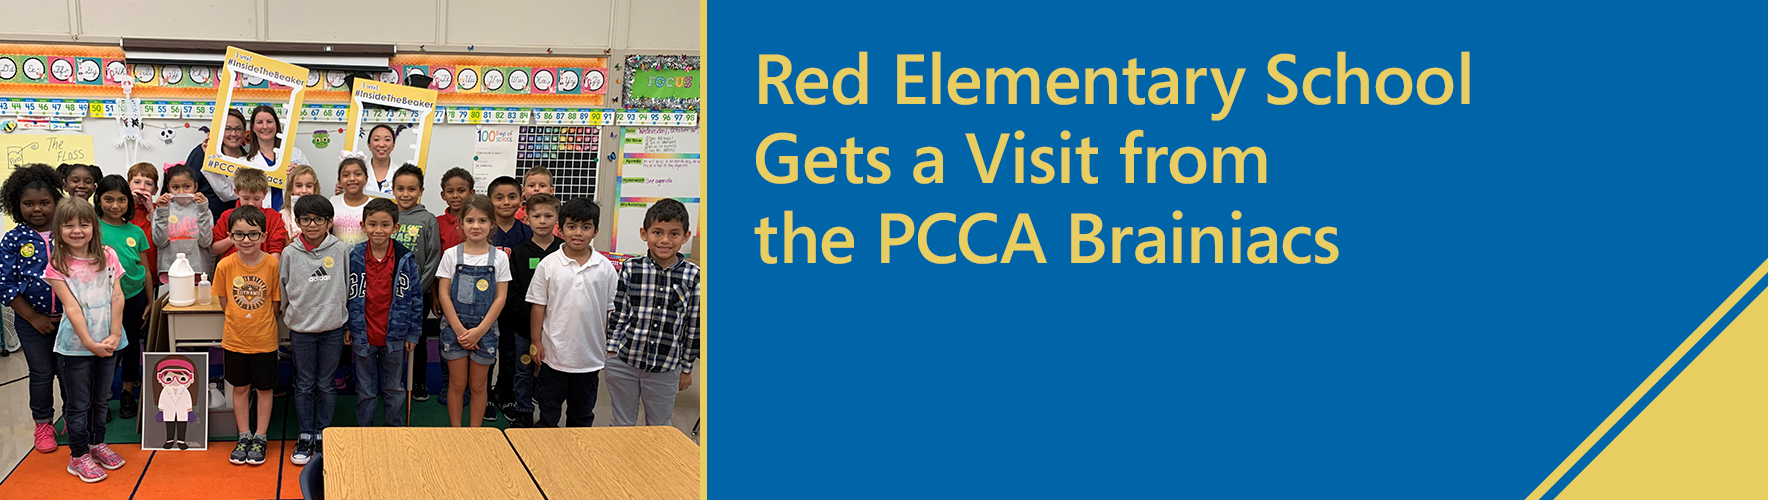 red_elementary_school_gets_a_visit_from_the_pcca_brainiacs.png